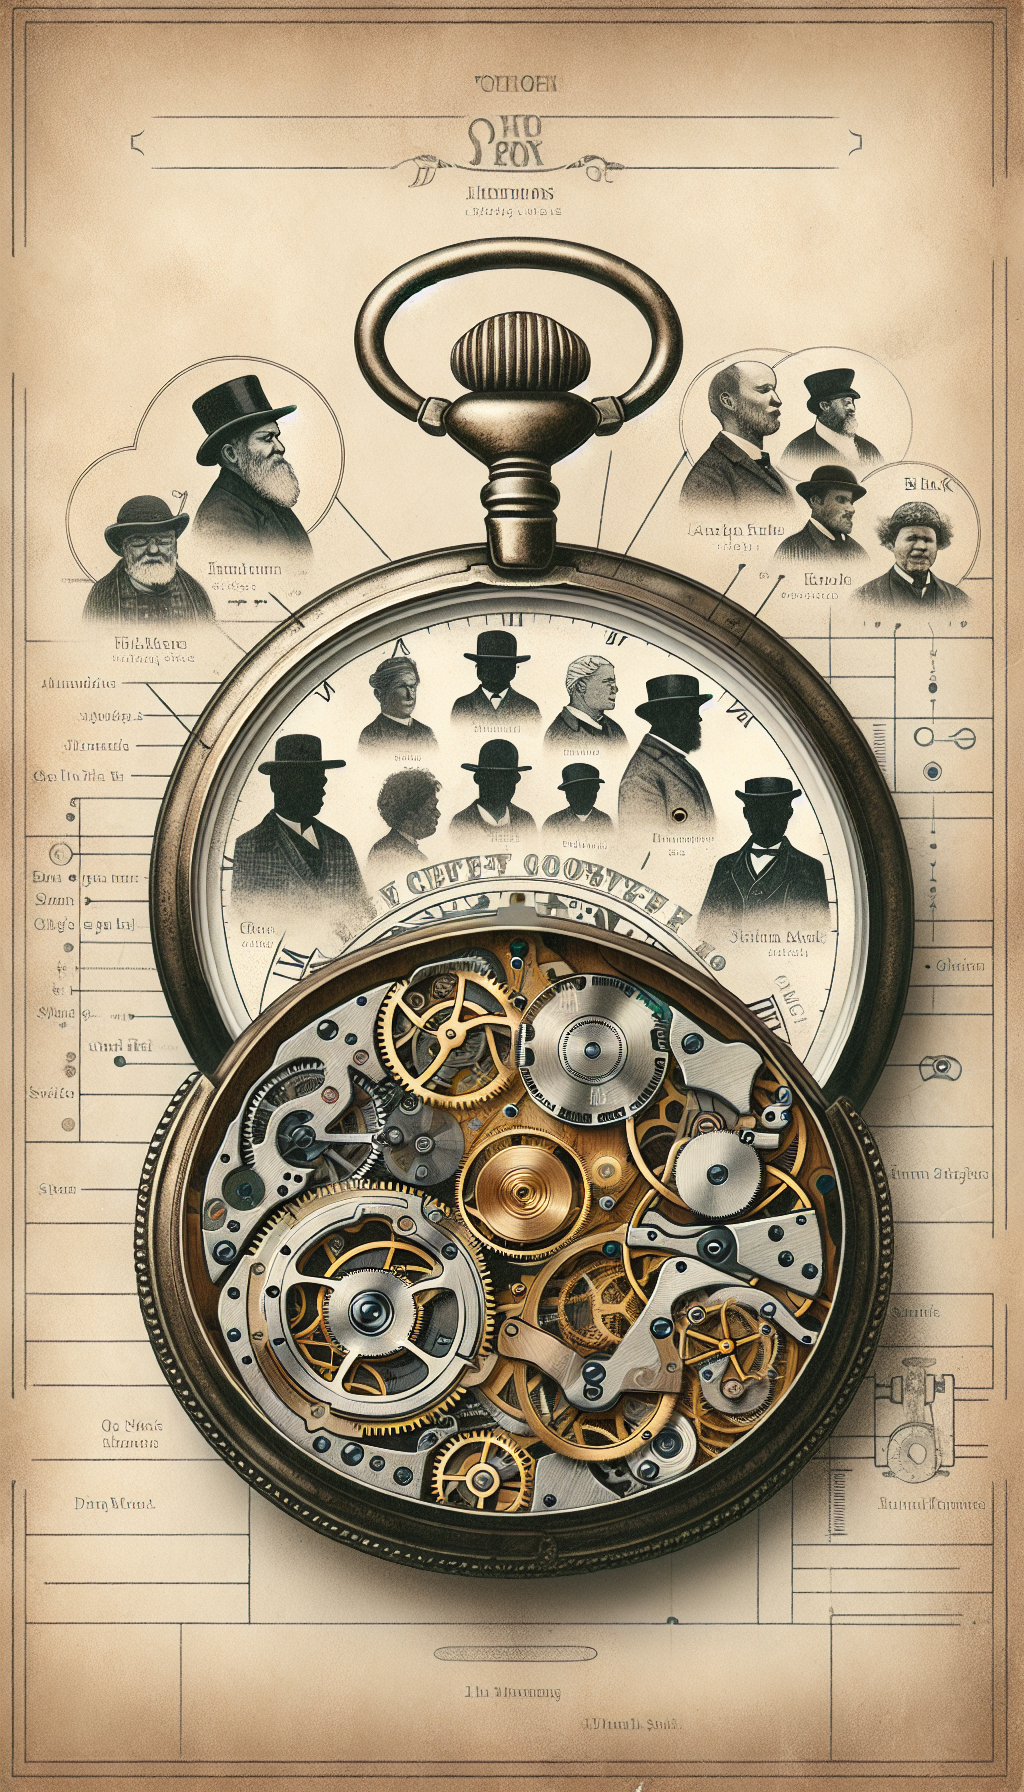 A collage-inspired illustration portrays an antique pocket watch with its back cover opened, revealing an intricate assembly of gears and springs. Ghostly silhouettes of historical watchmakers hover over the mechanism, marking their contributions. Each "maker" is drawn in a distinct style—sketch-like, watercolor, silhouette, and steampunk—symbolizing the diverse innovations within the evolution of timepiece technology.